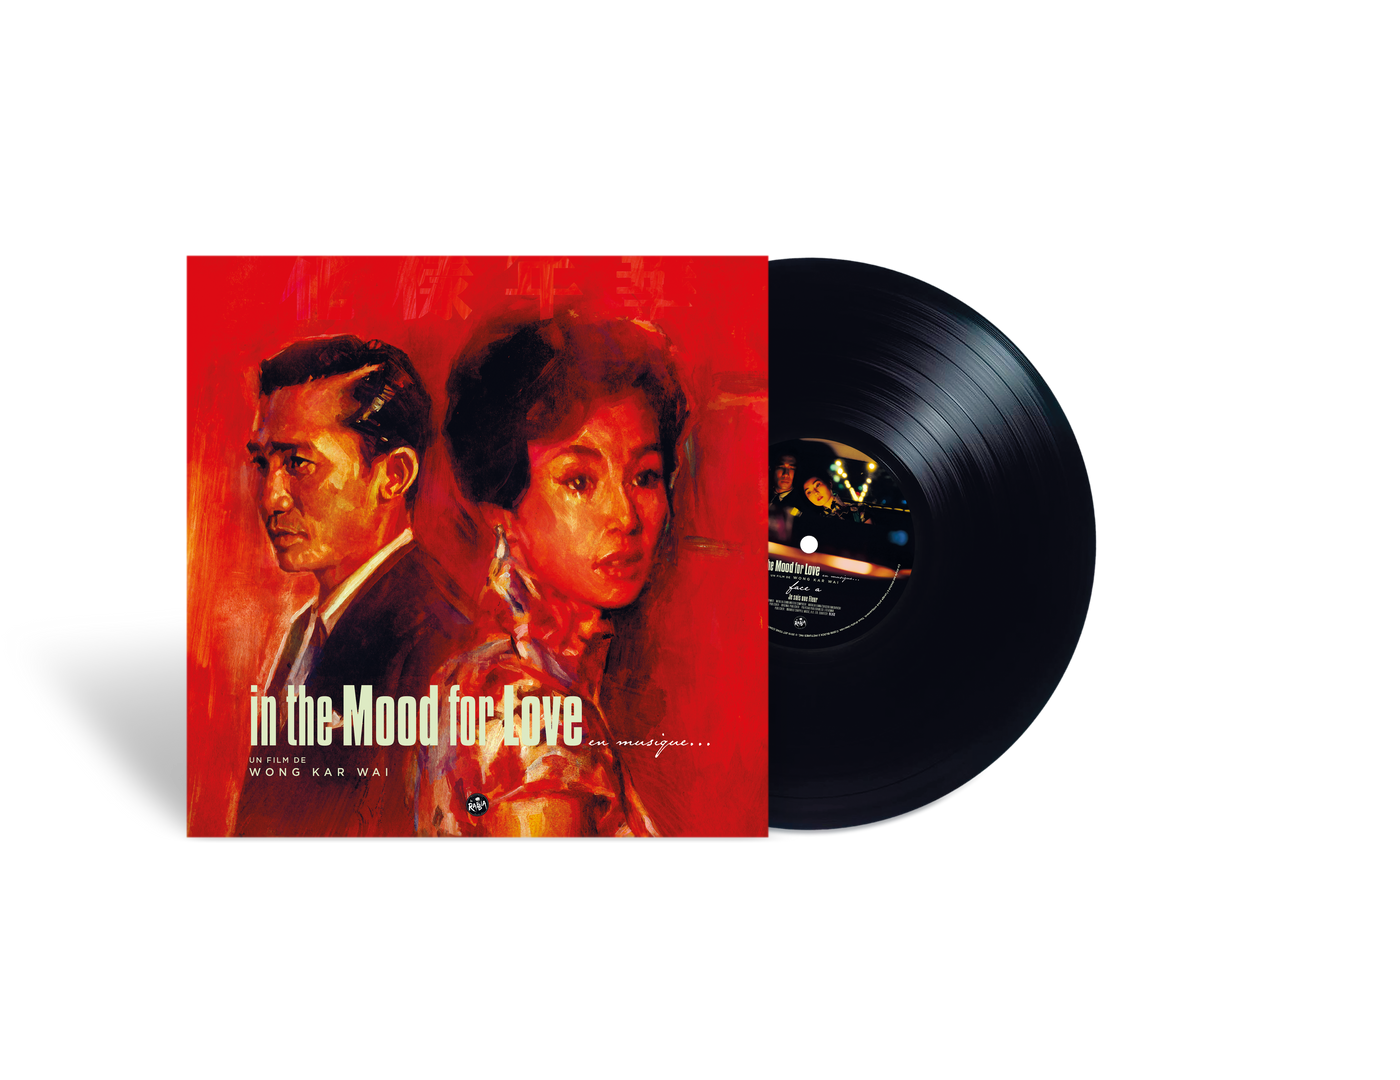 Vinyle 45T "In The Mood For Love"